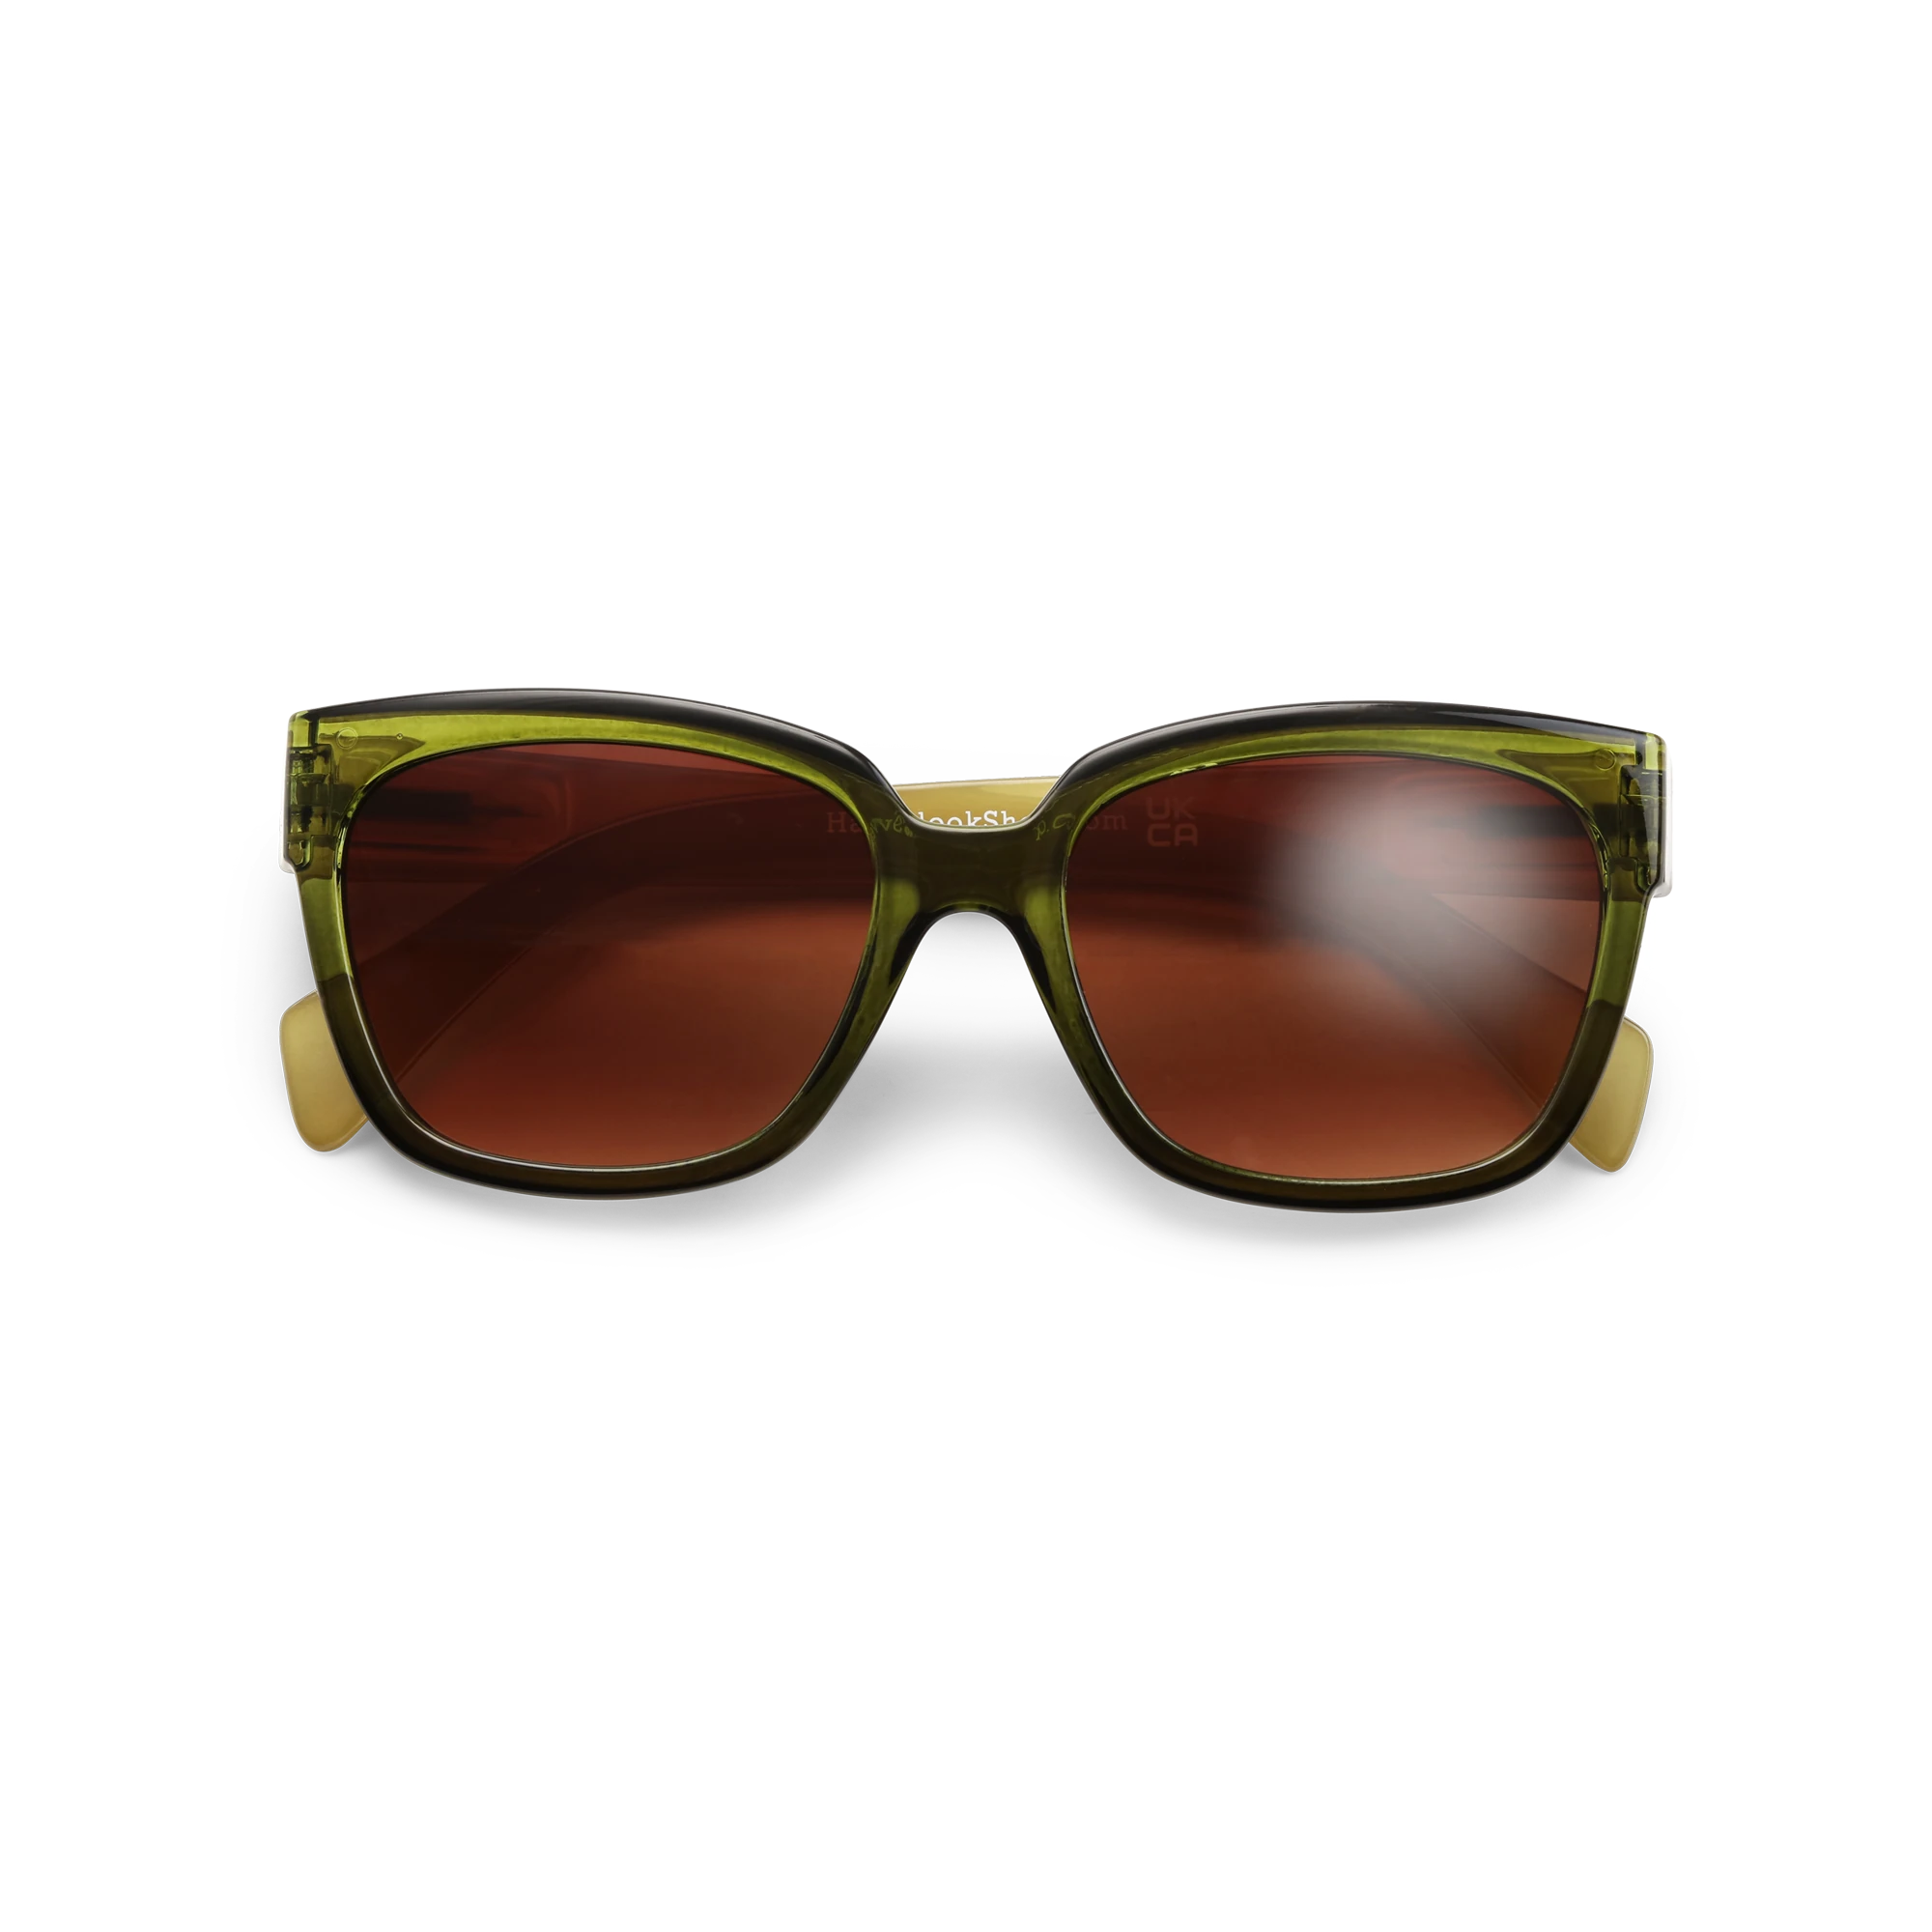 Mood Sunglasses - 100% UV Protection by Have A Look